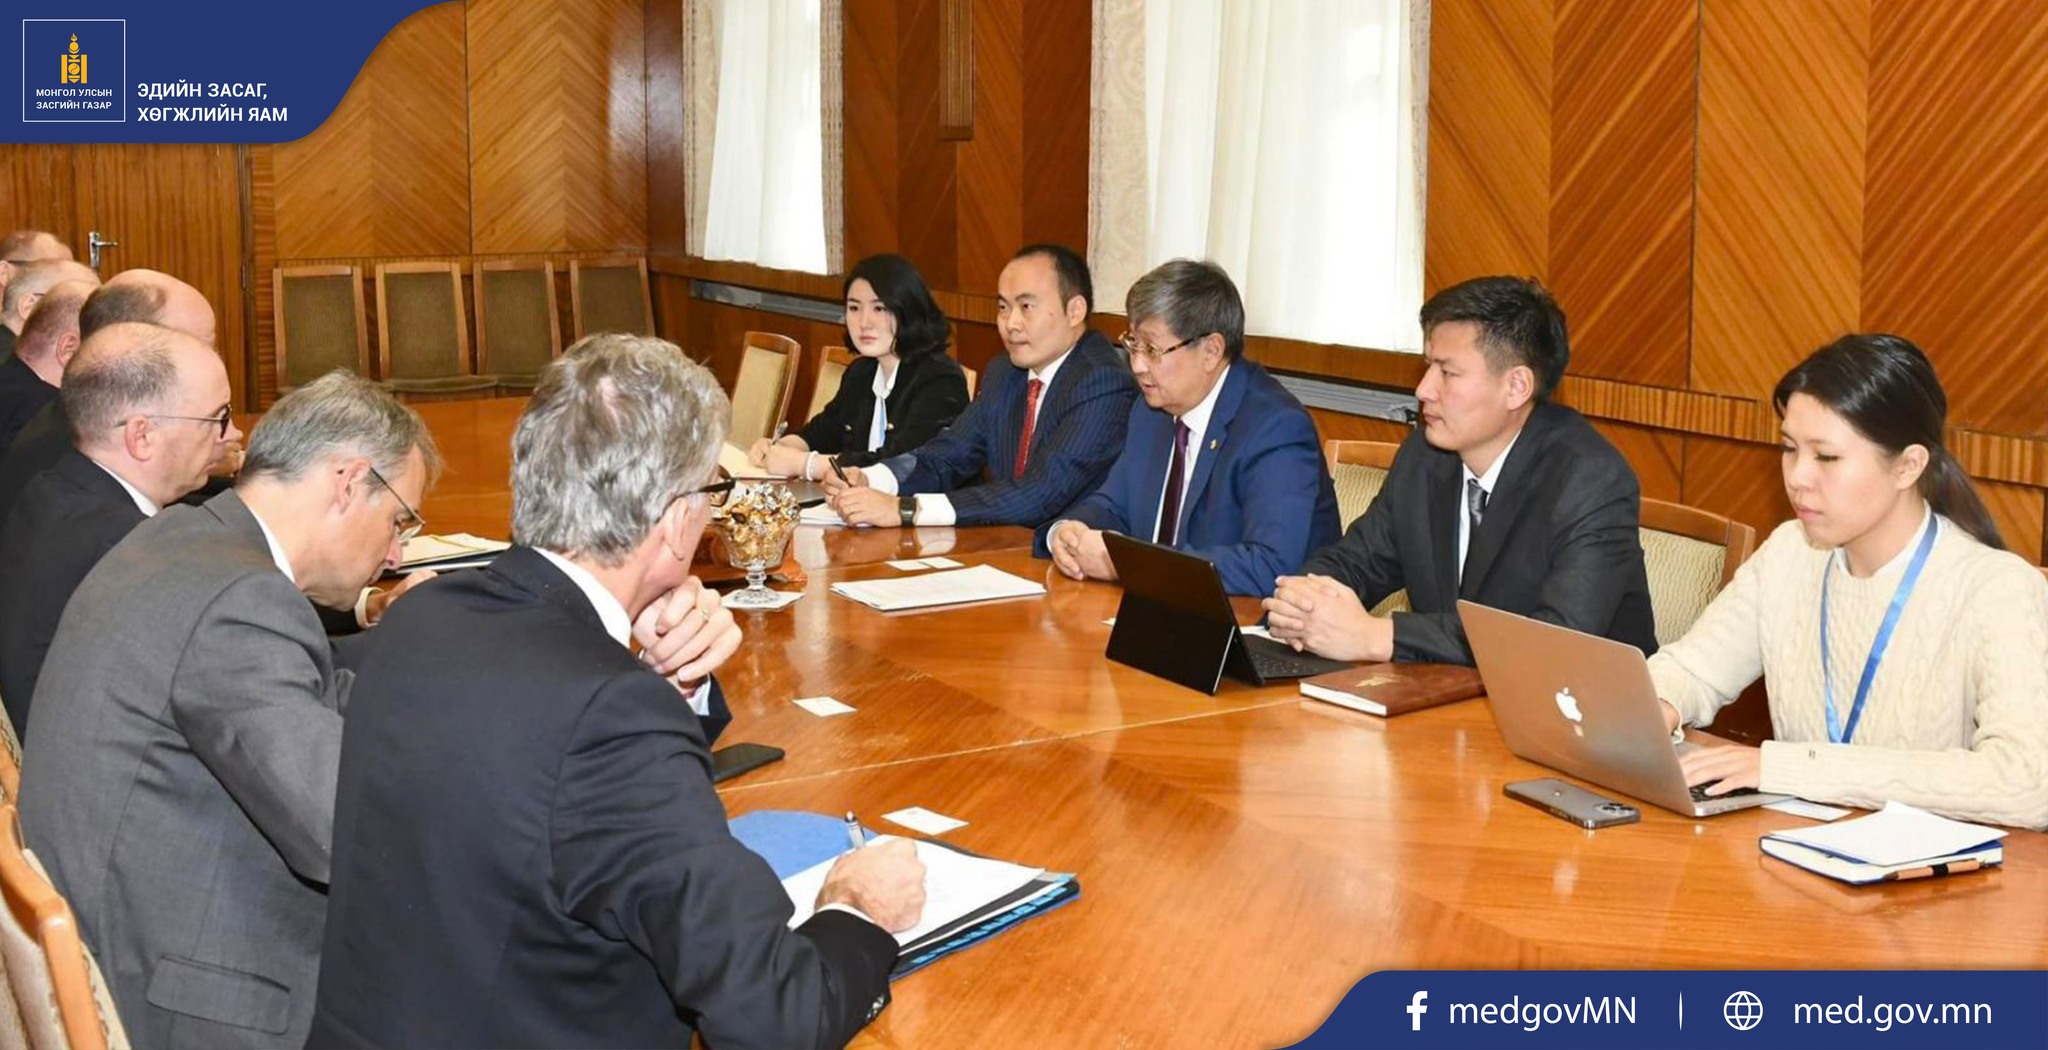 Minister Ch. Khurelbaatar met with Parliamentary State Secretary Niels Annen and Ambassador Jörn Rosenberg of the Federal Republic of Germany